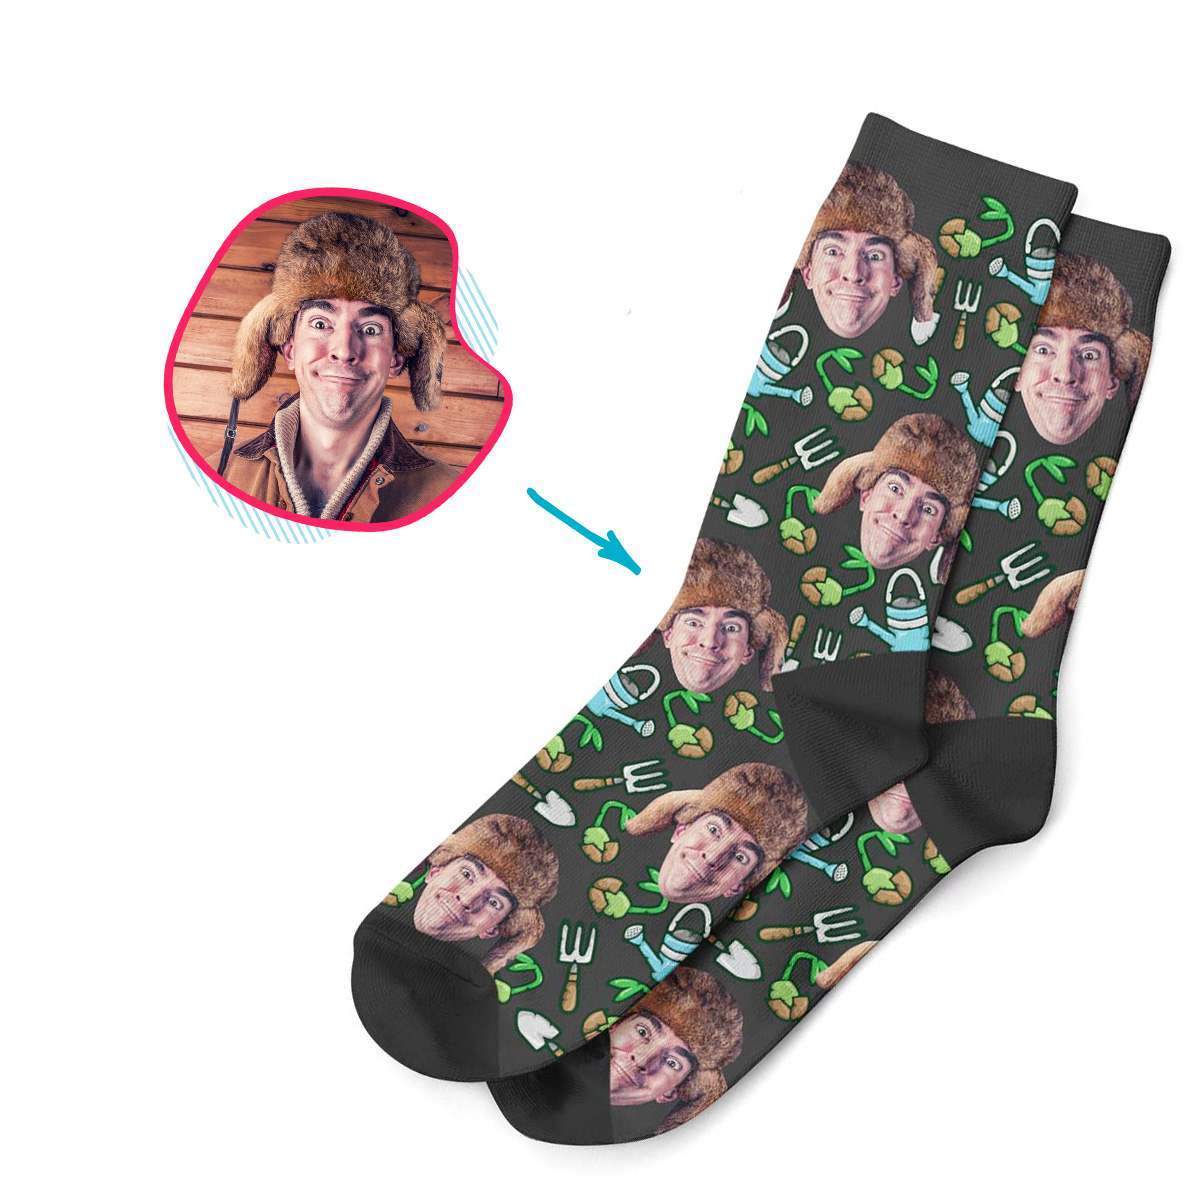 dark Gardening socks personalized with photo of face printed on them